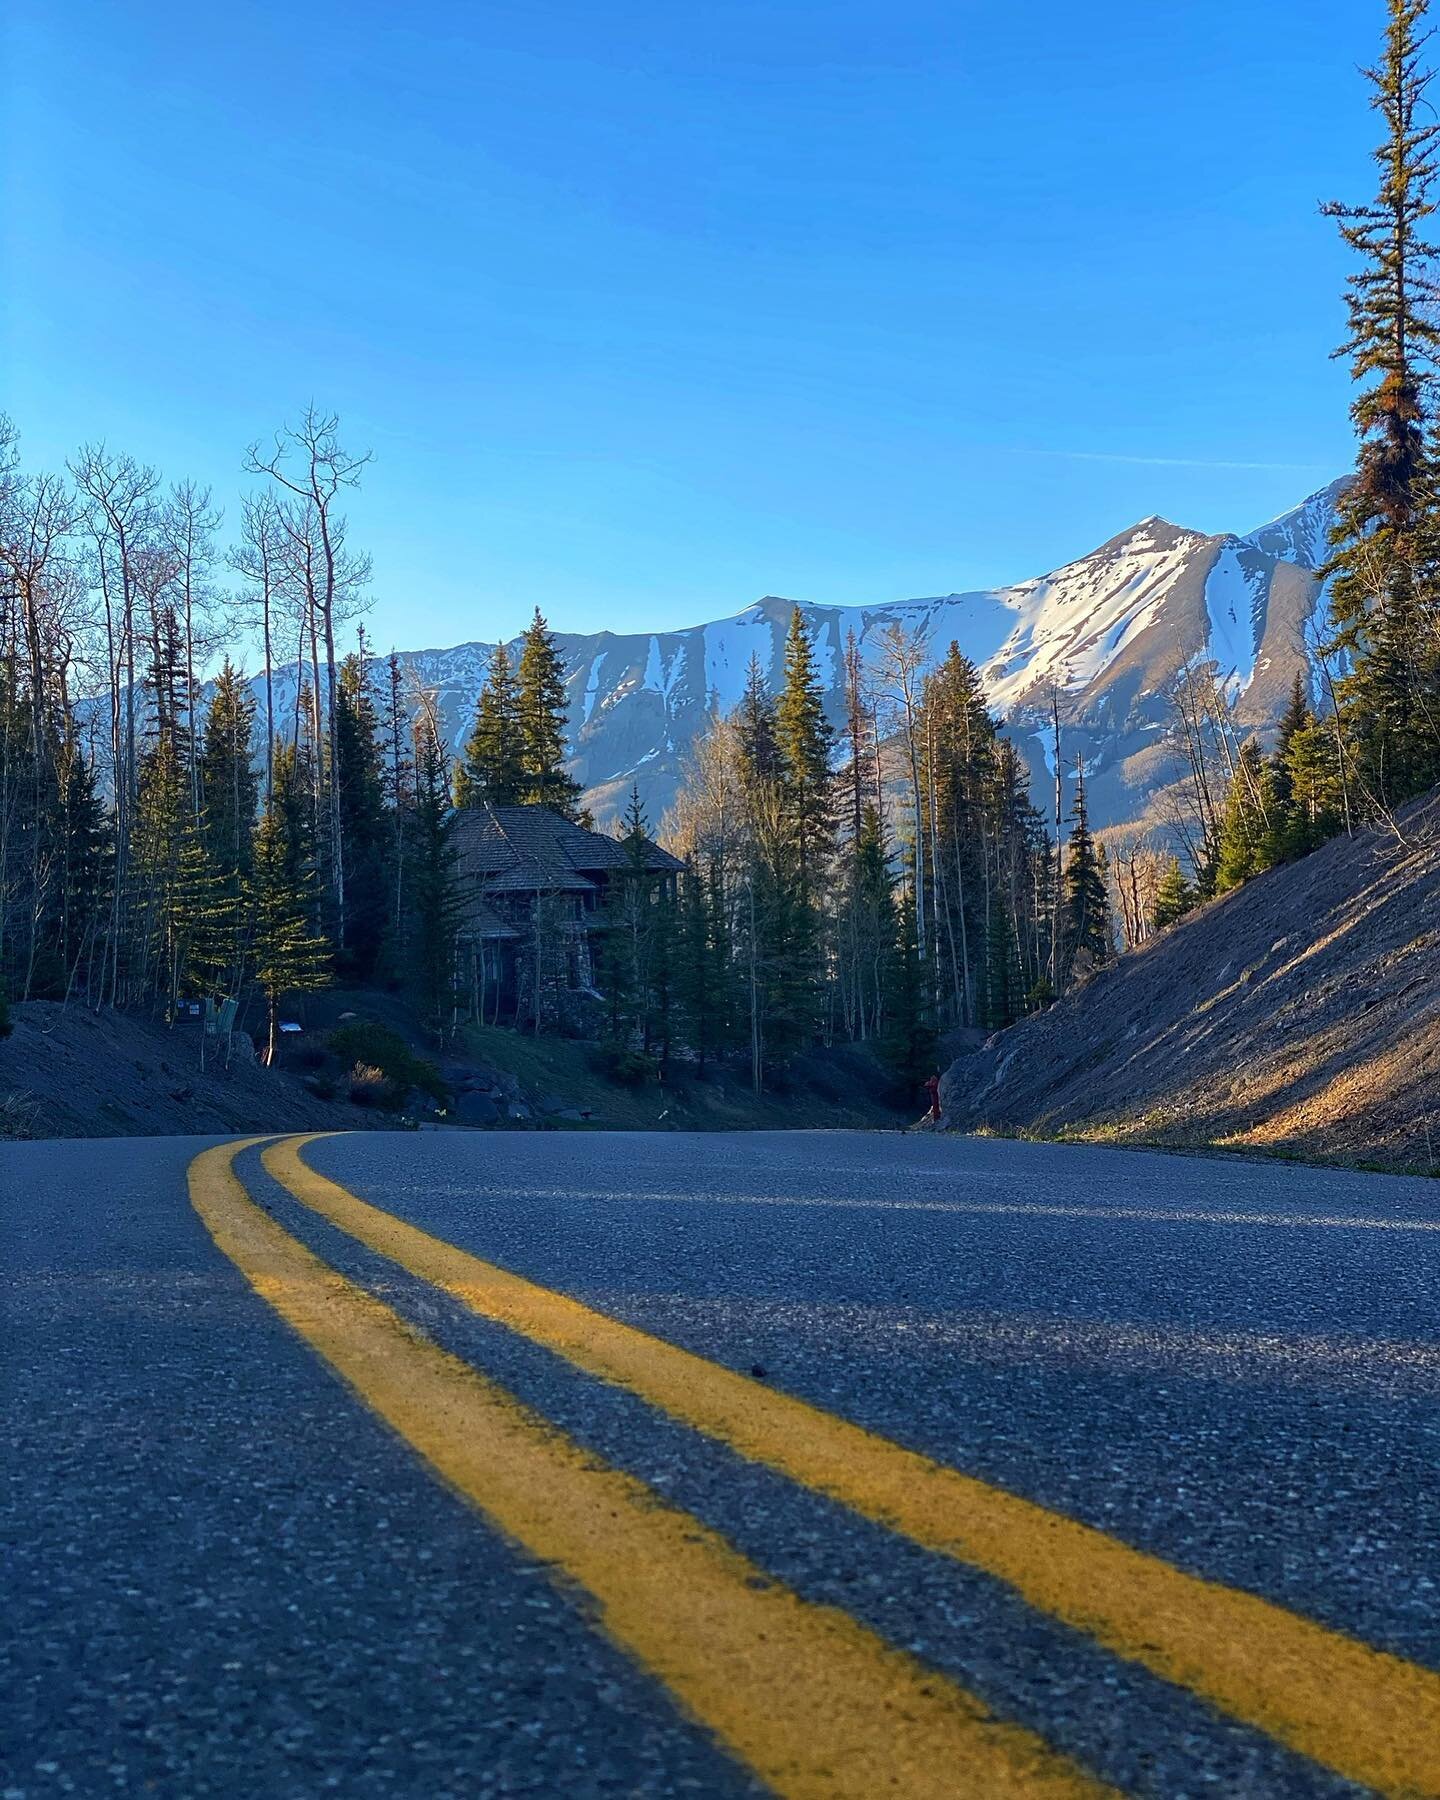 ✨Always take the road less traveled ✨
&bull;
And if you are lucky enough&hellip;that road will lead you to Telluride🏔️
&bull;
Hope to see you this summer! 🤩
#telluridecolorado #maytheroadrisetomeetyou 
#telluridelife